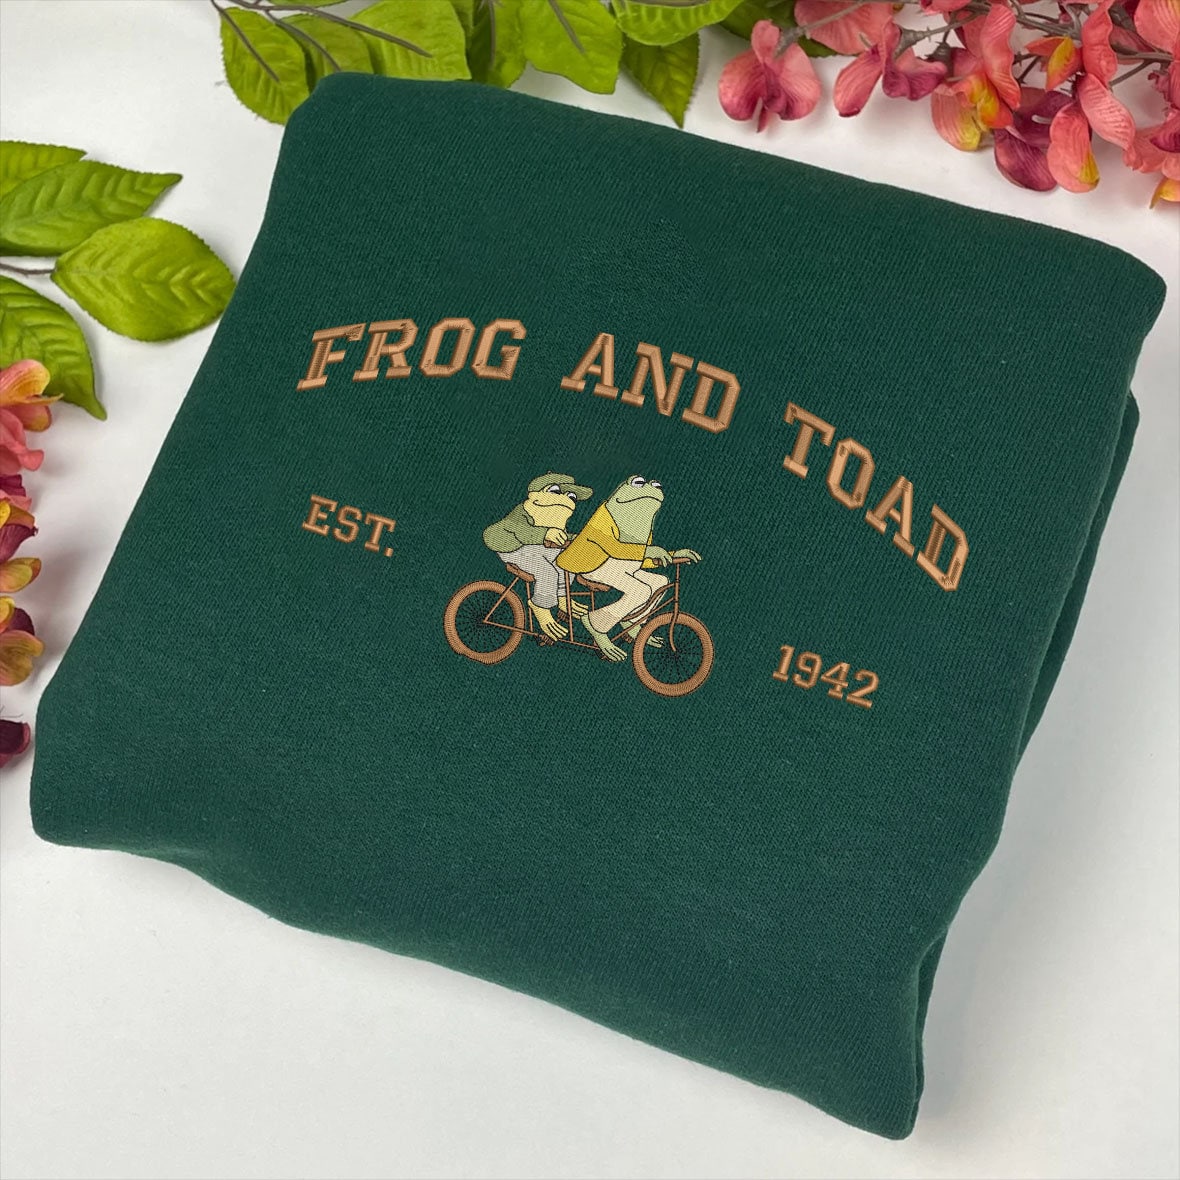 Frog and Toad -  Canada